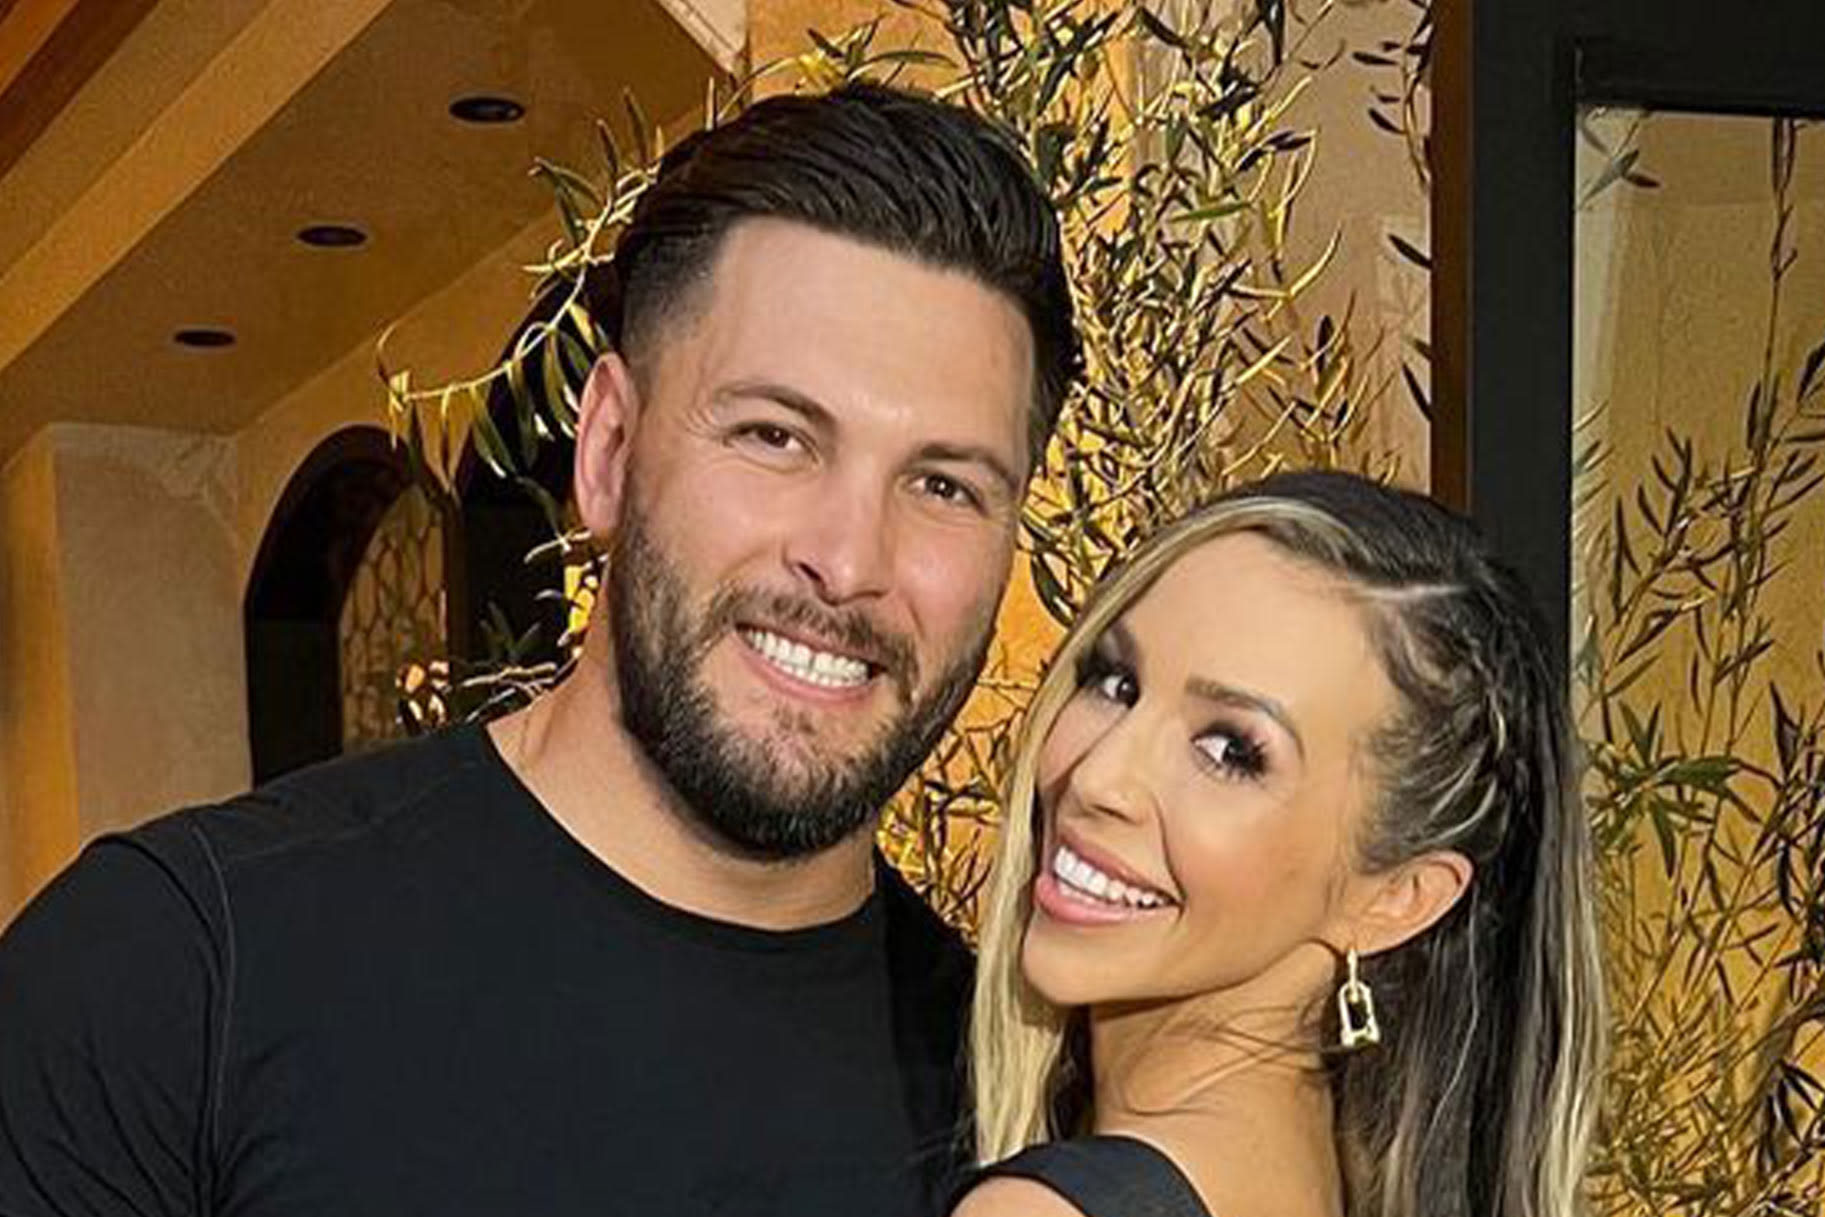 Scheana Defends Her and Brock's Finances: "It Doesn’t Matter Who’s Making the Money"